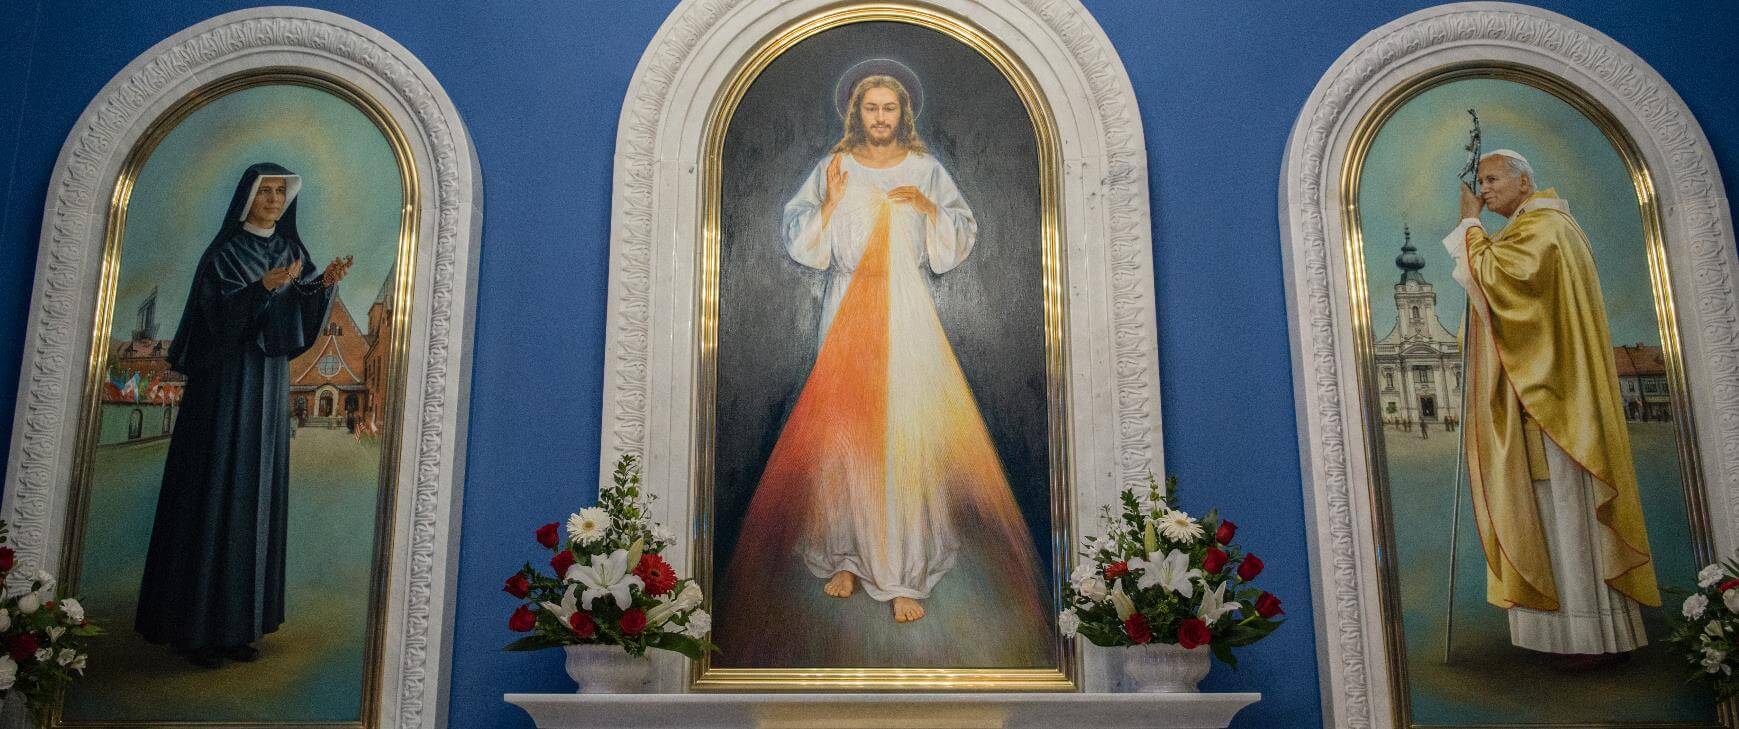 Archbishop Lori to lead livestreamed Divine Mercy Mass and Chaplet from Baltimore Basilica